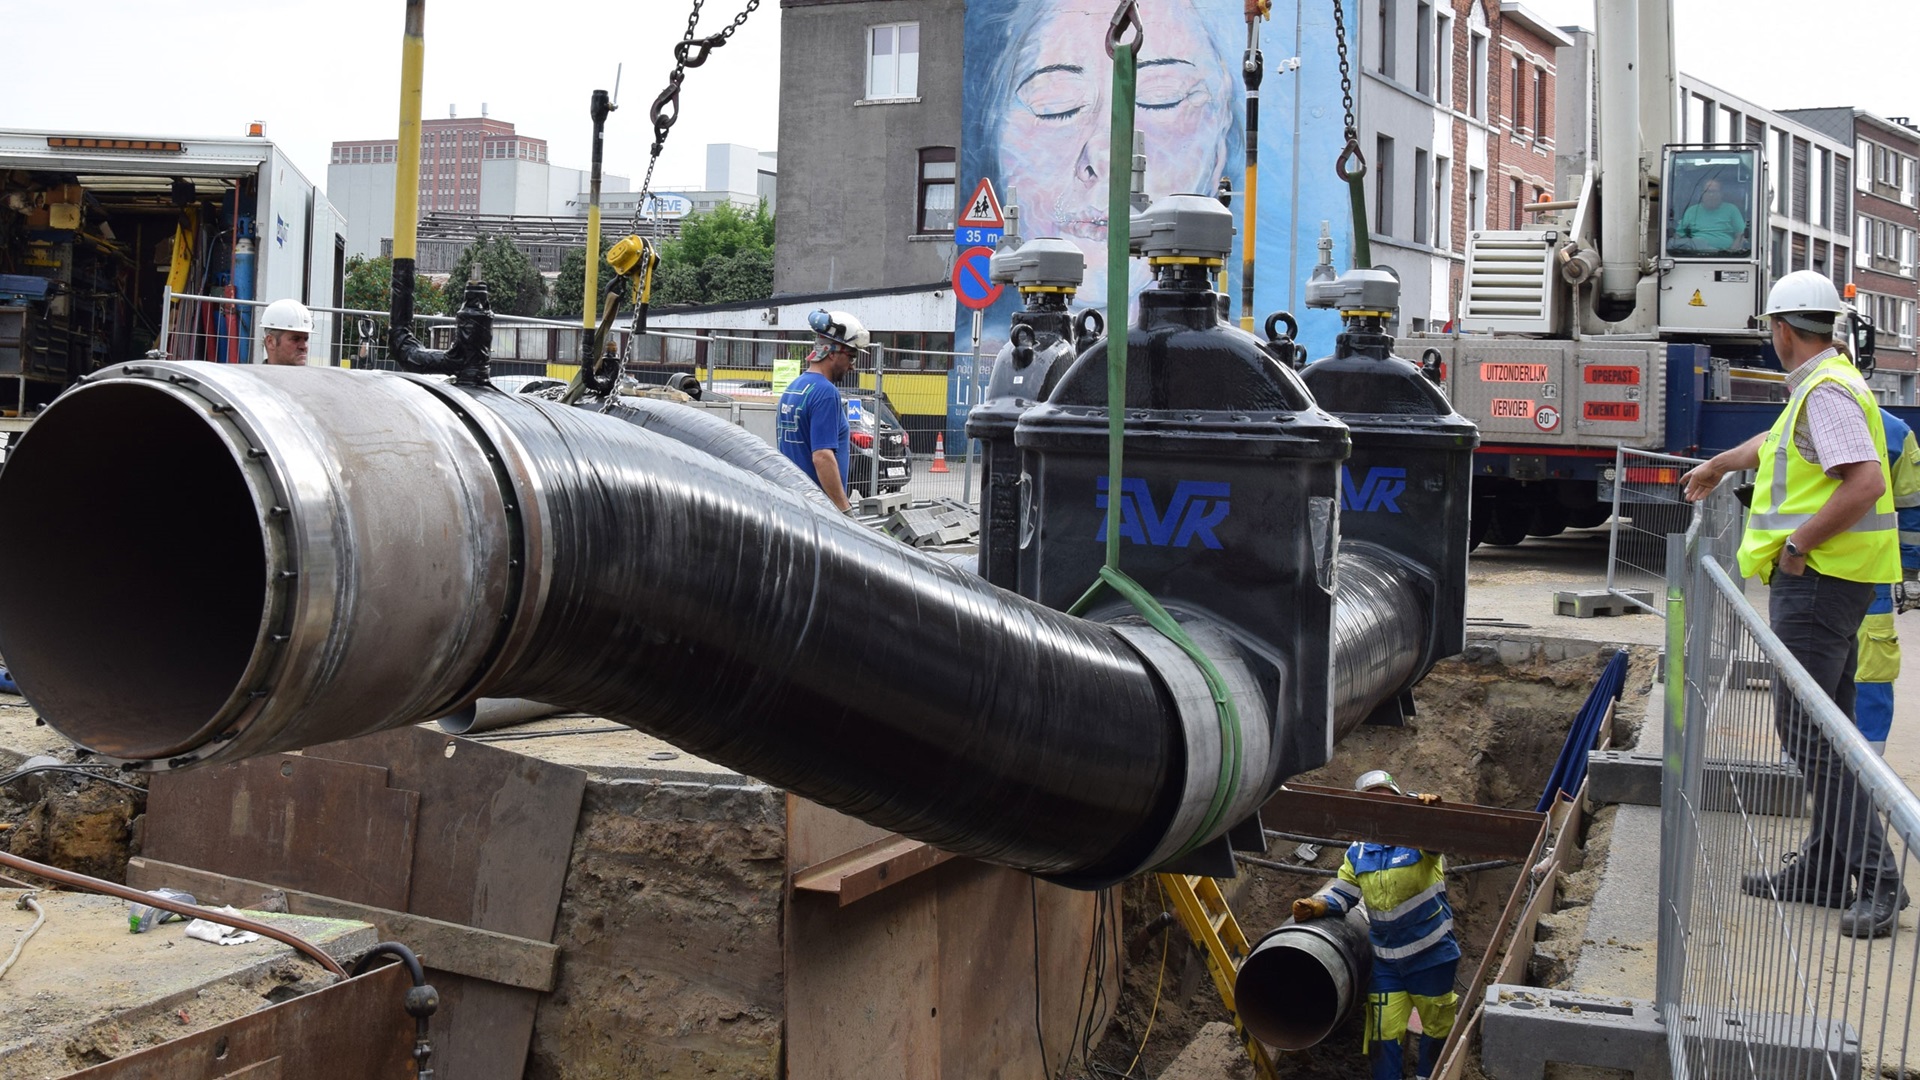 New gas pipe with AVK gate valves for gas distribution, Antwerp, Belgium